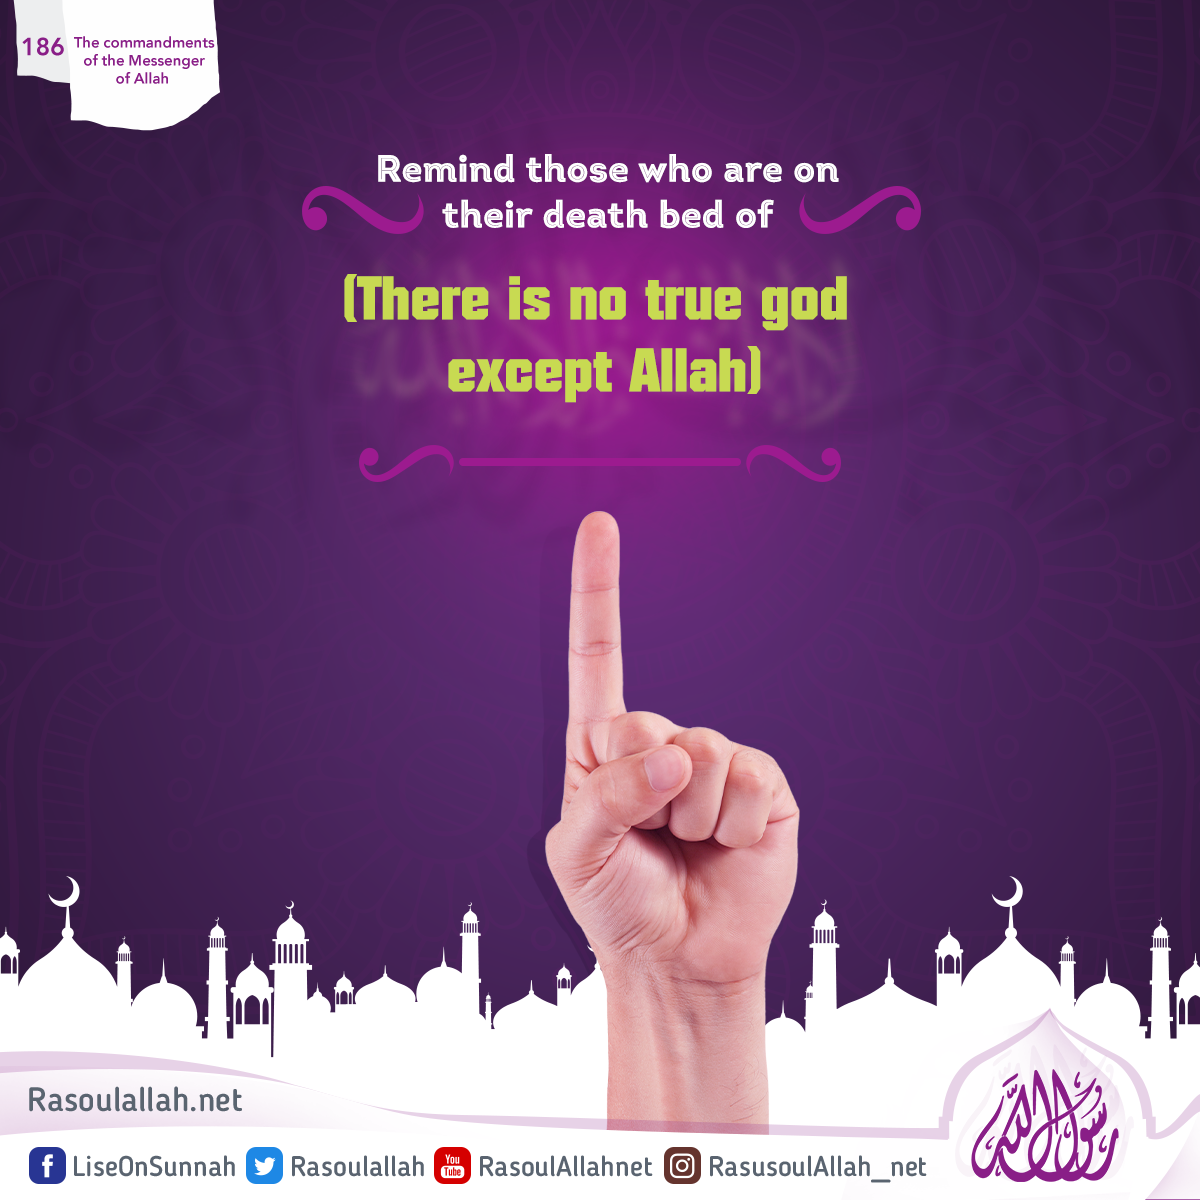 Remind those who are on their death bed of (There is no true god except Allah)